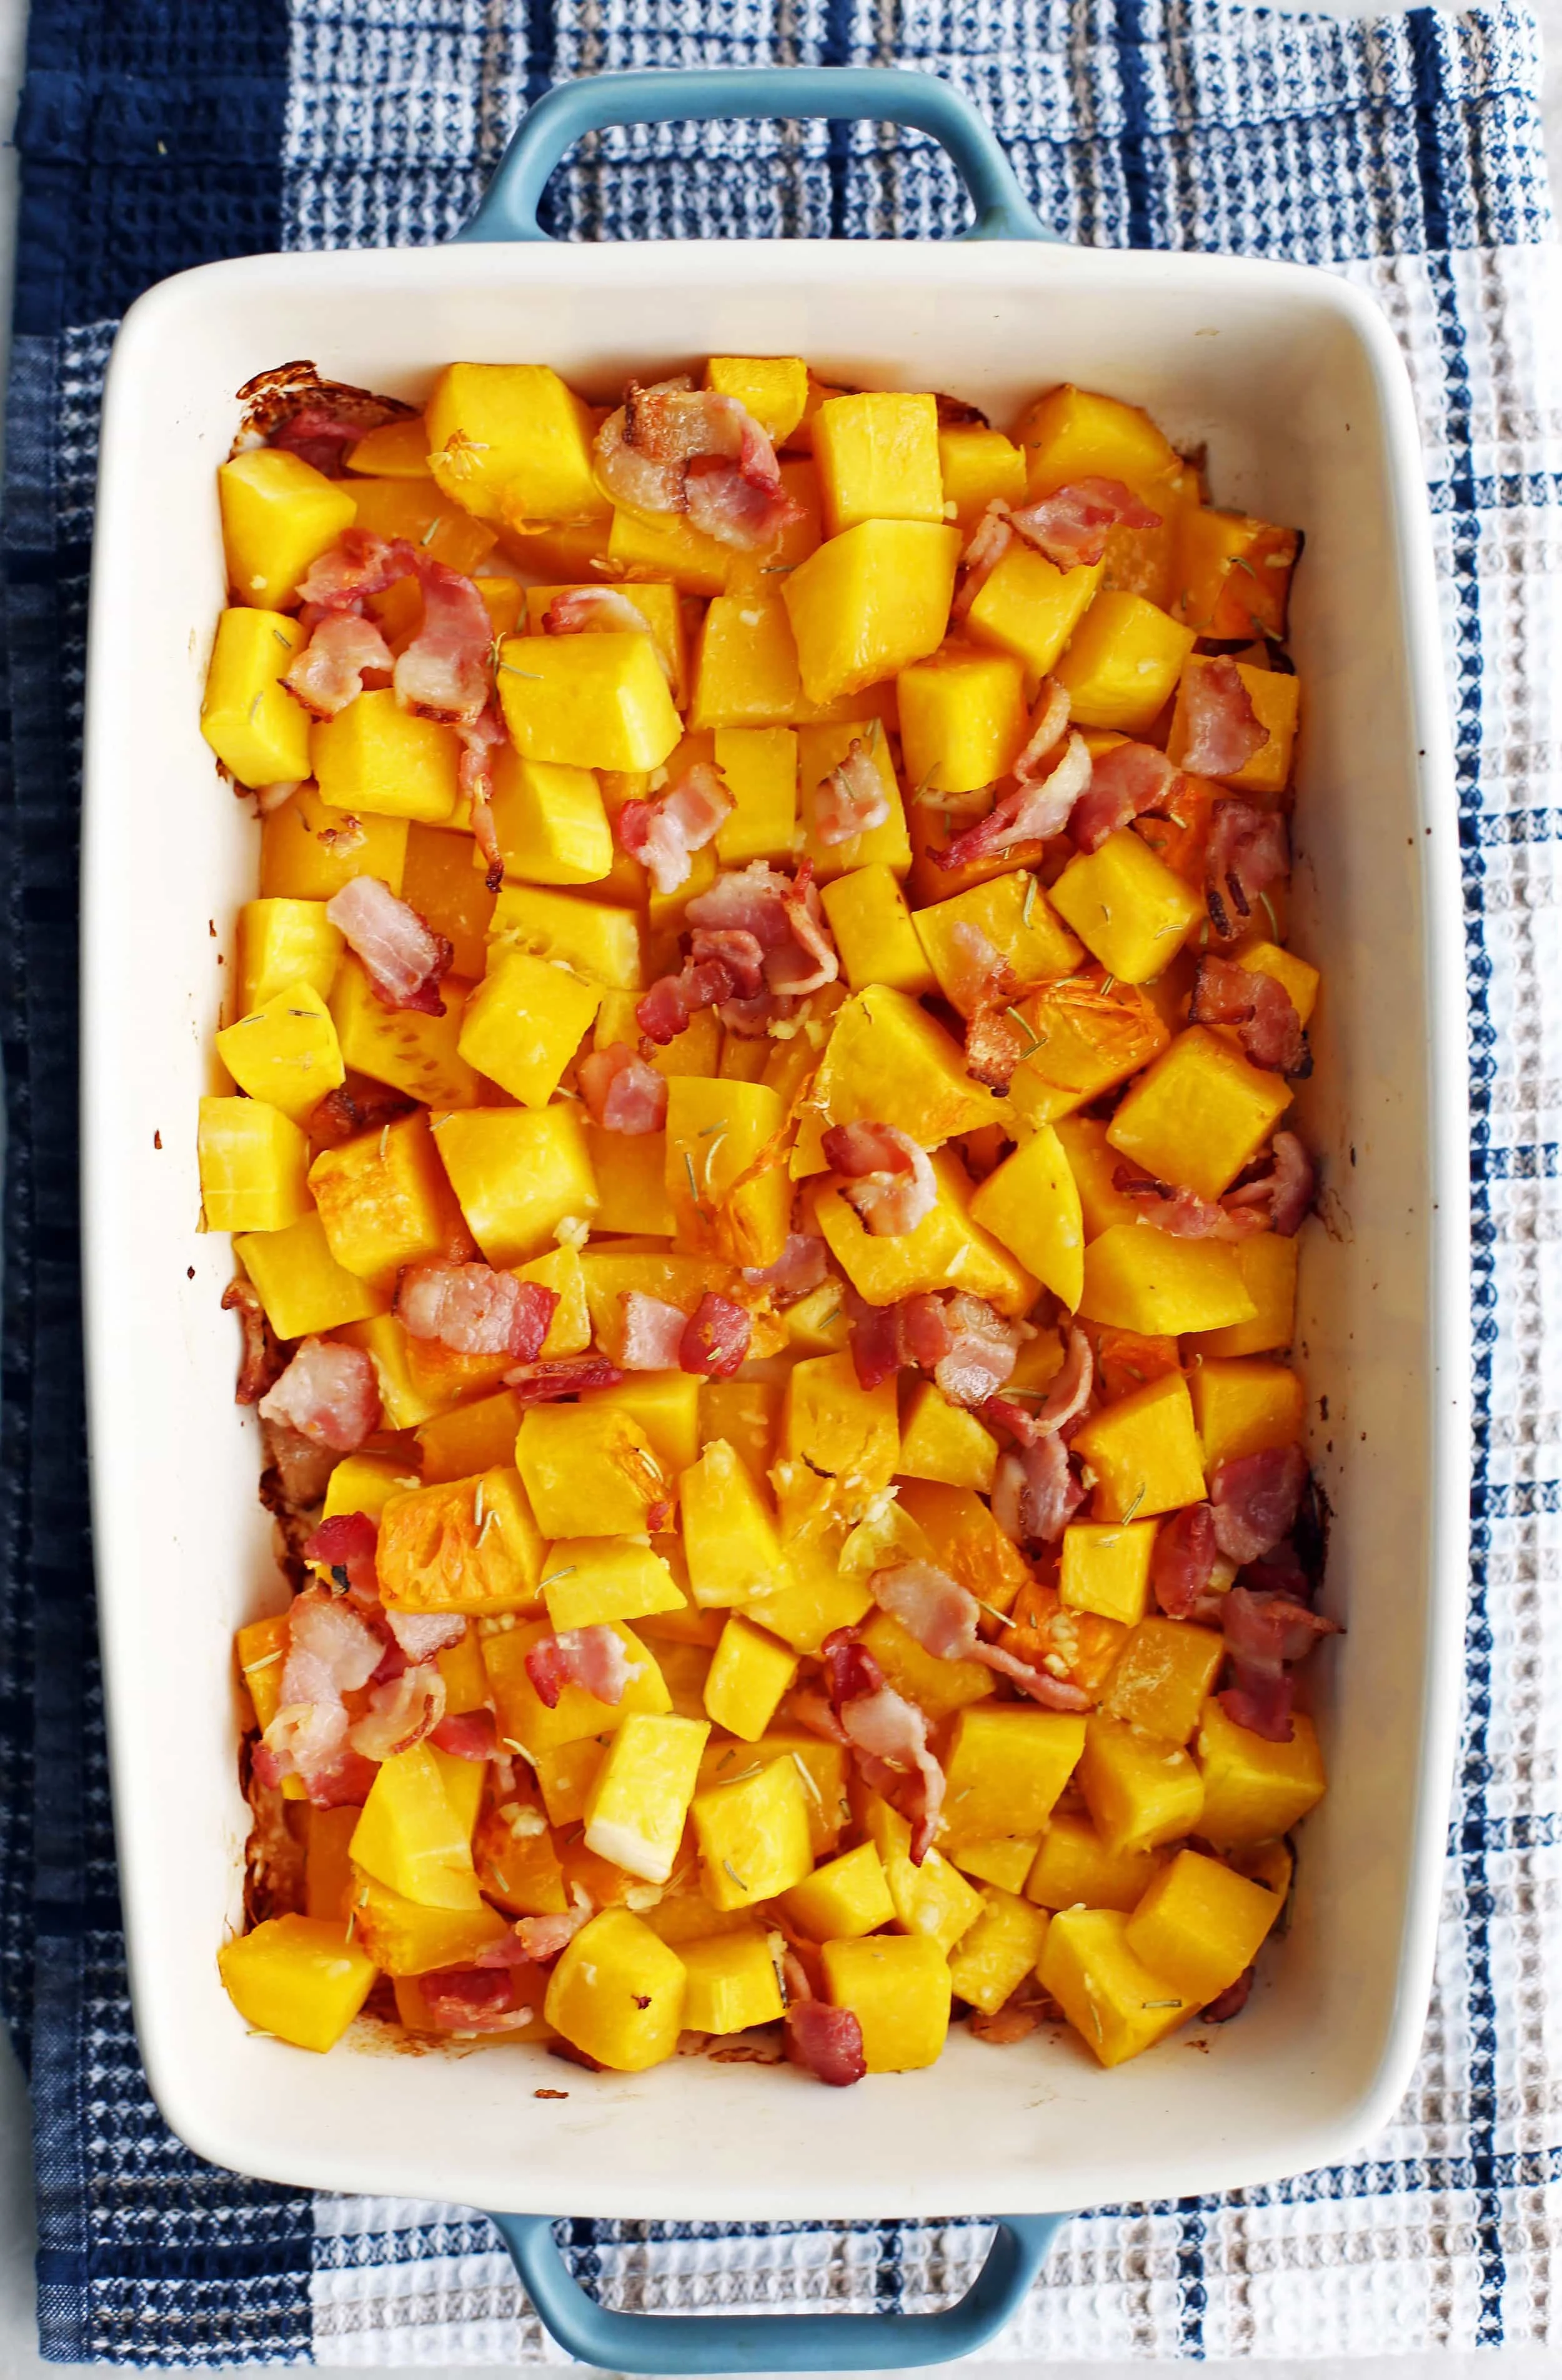 Baked butternut squash and chopped bacon in a large baking dish.